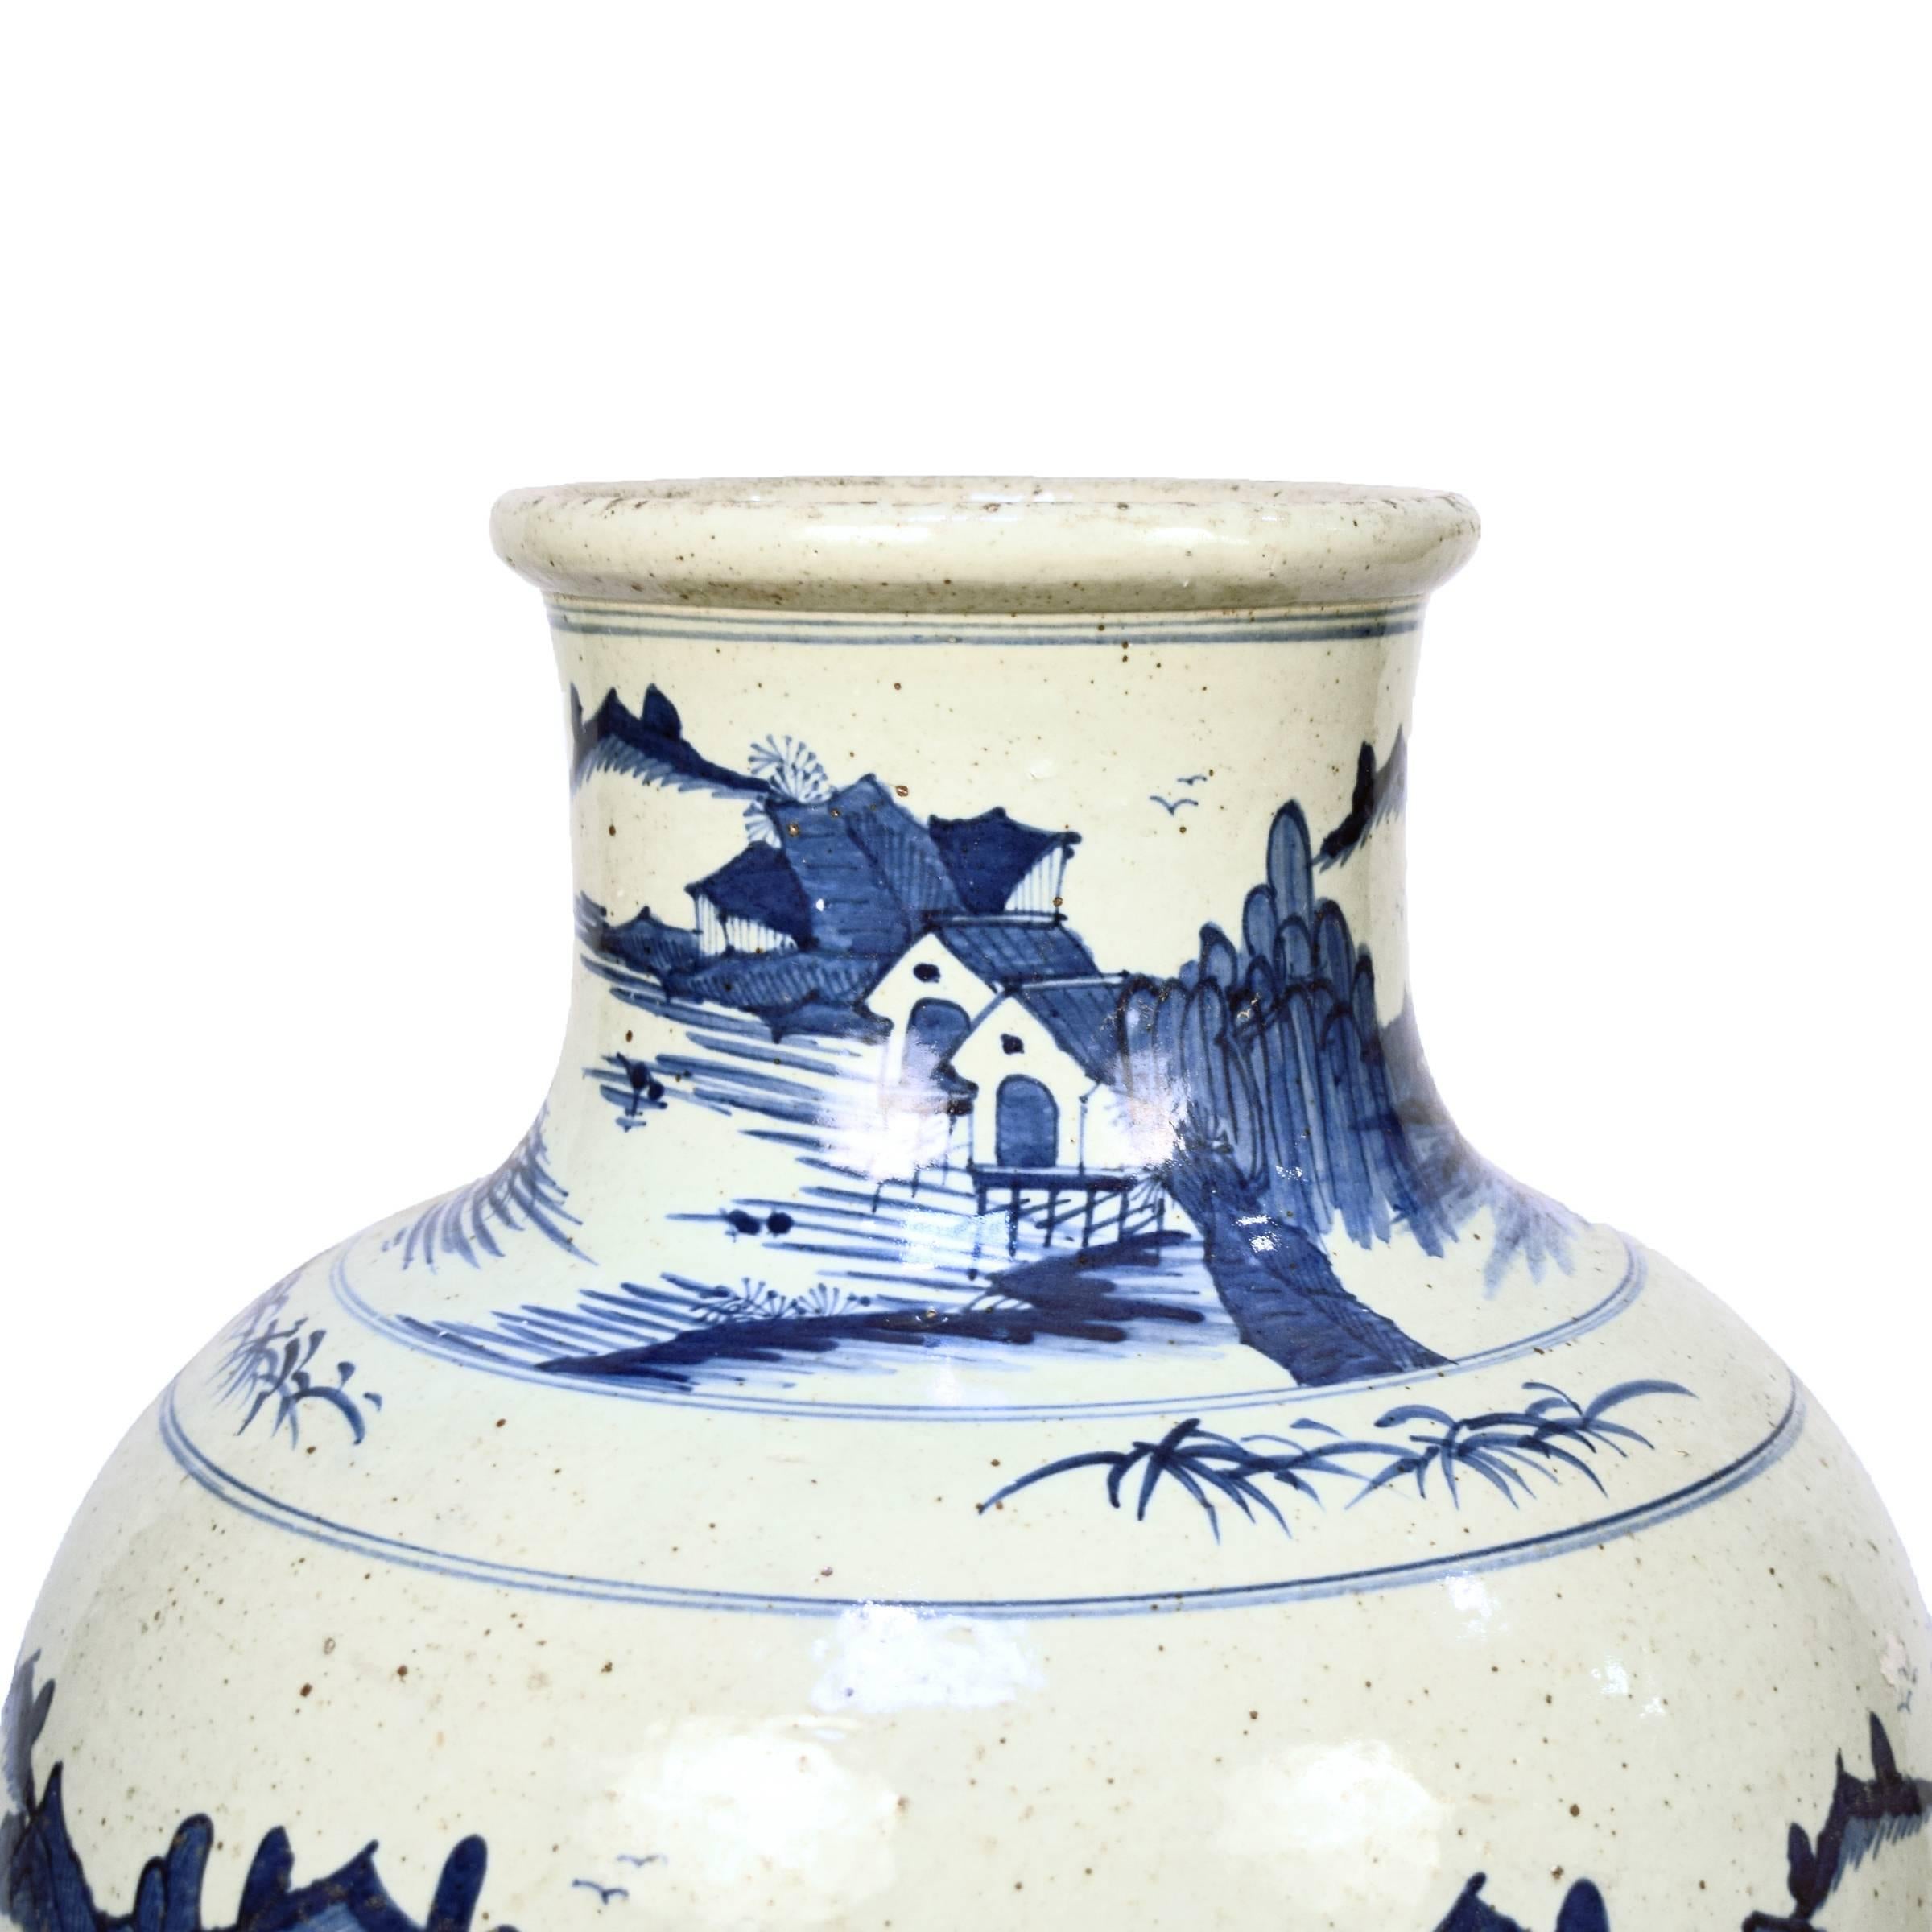 Contemporary Chinese Blue and White Shan Shui Vase